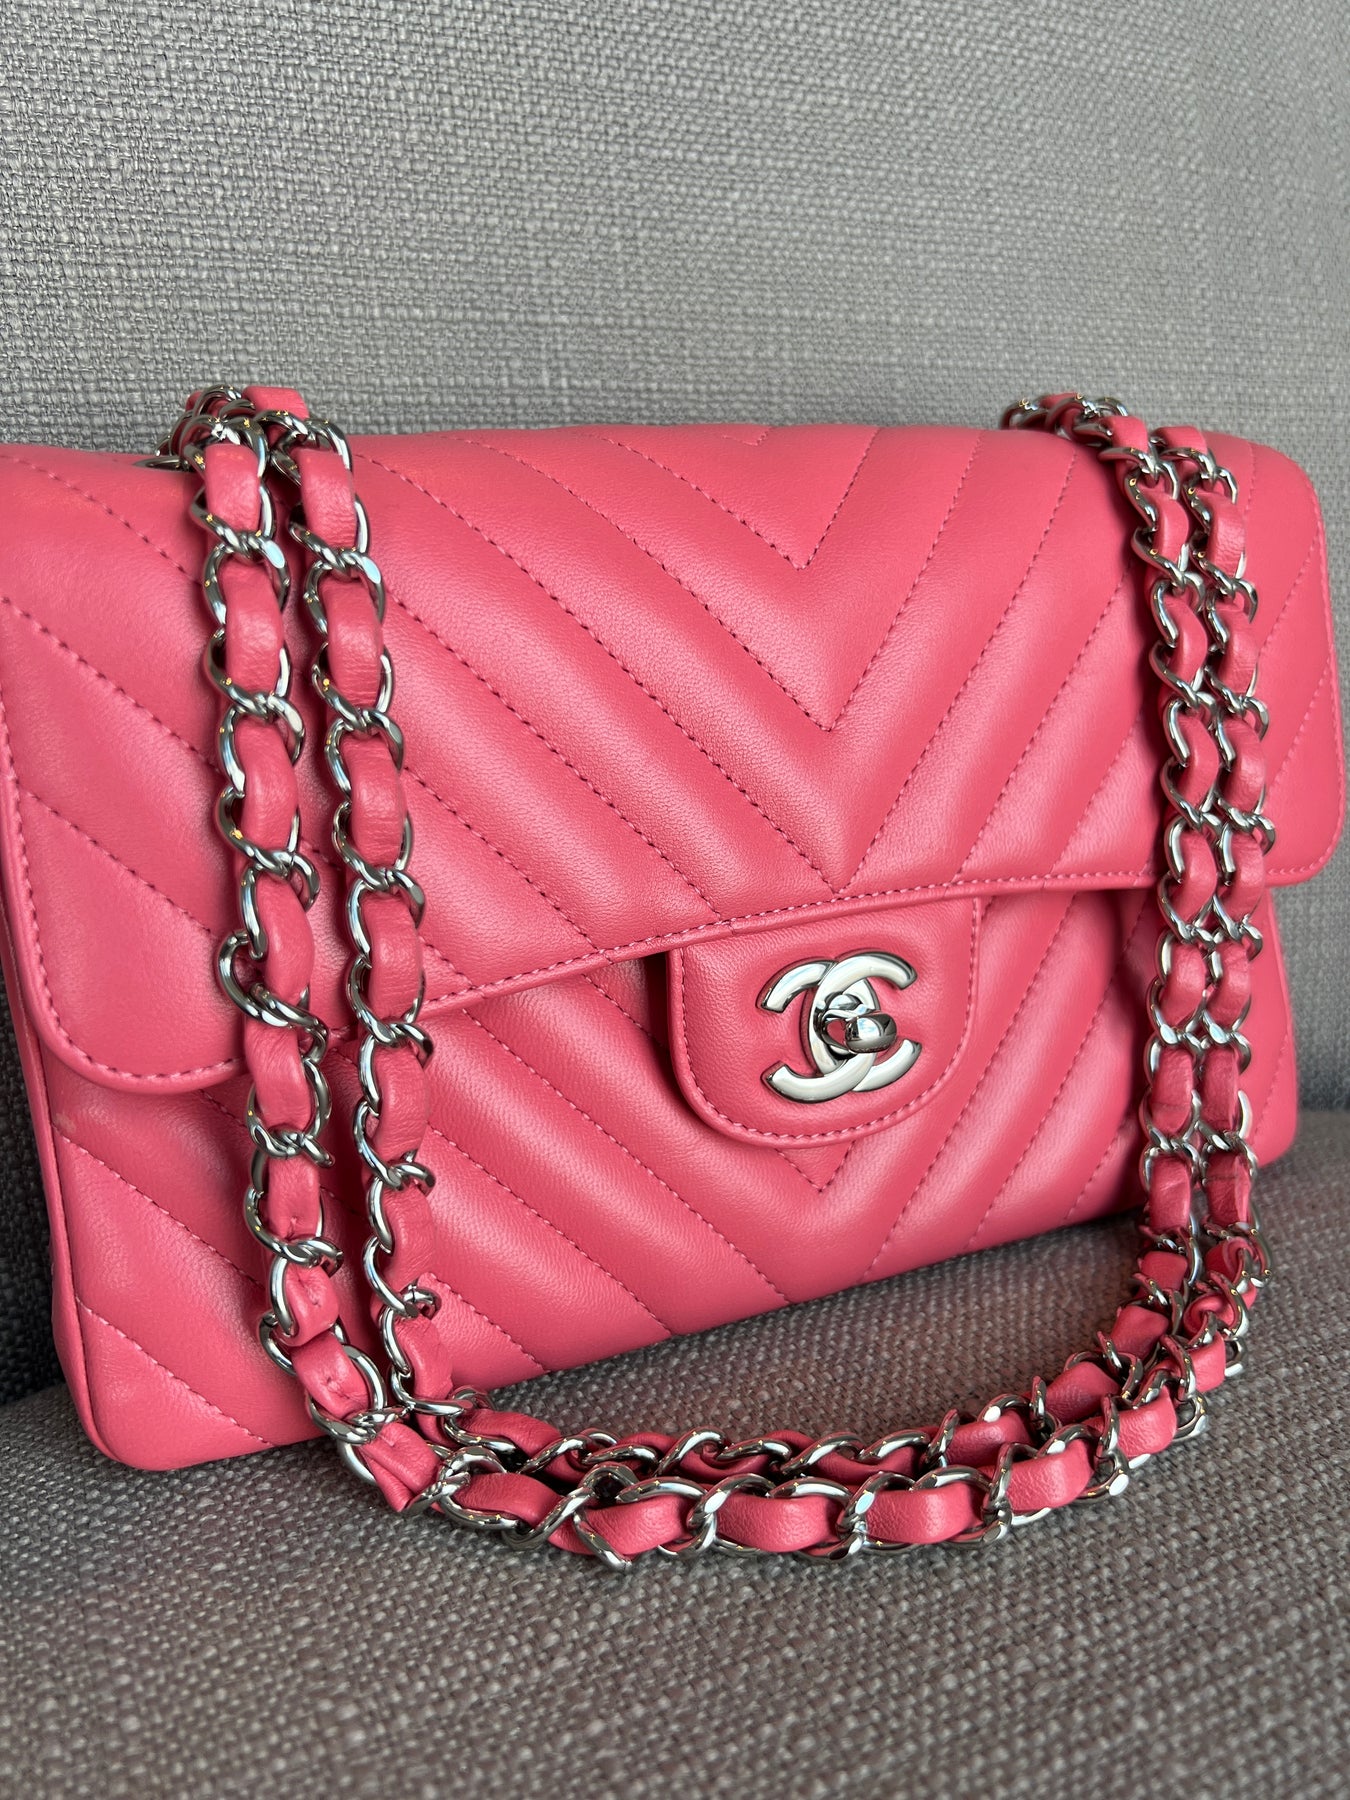 CHANEL Chevron Small Classic Double Flap Bag(RRP £8,180)